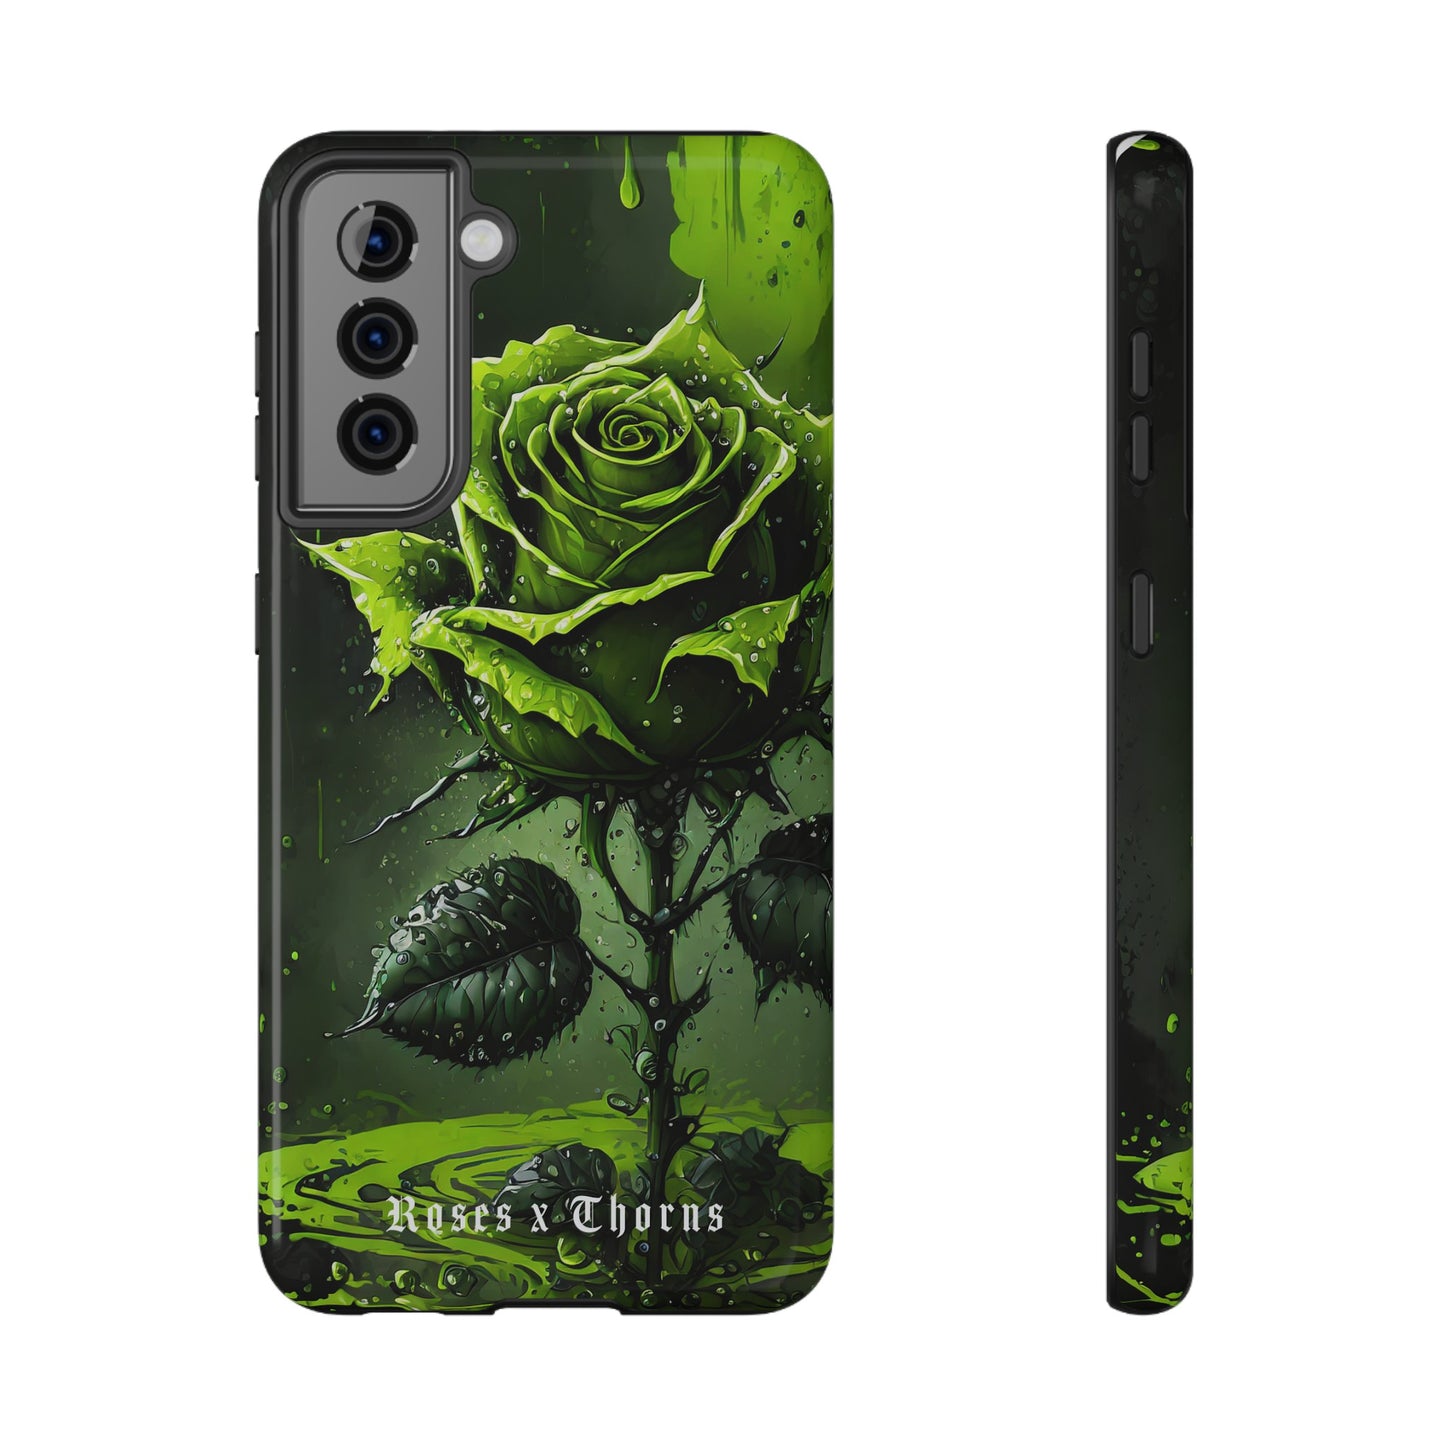 Toxic Roses x Thorns Impact-Resistant Cases